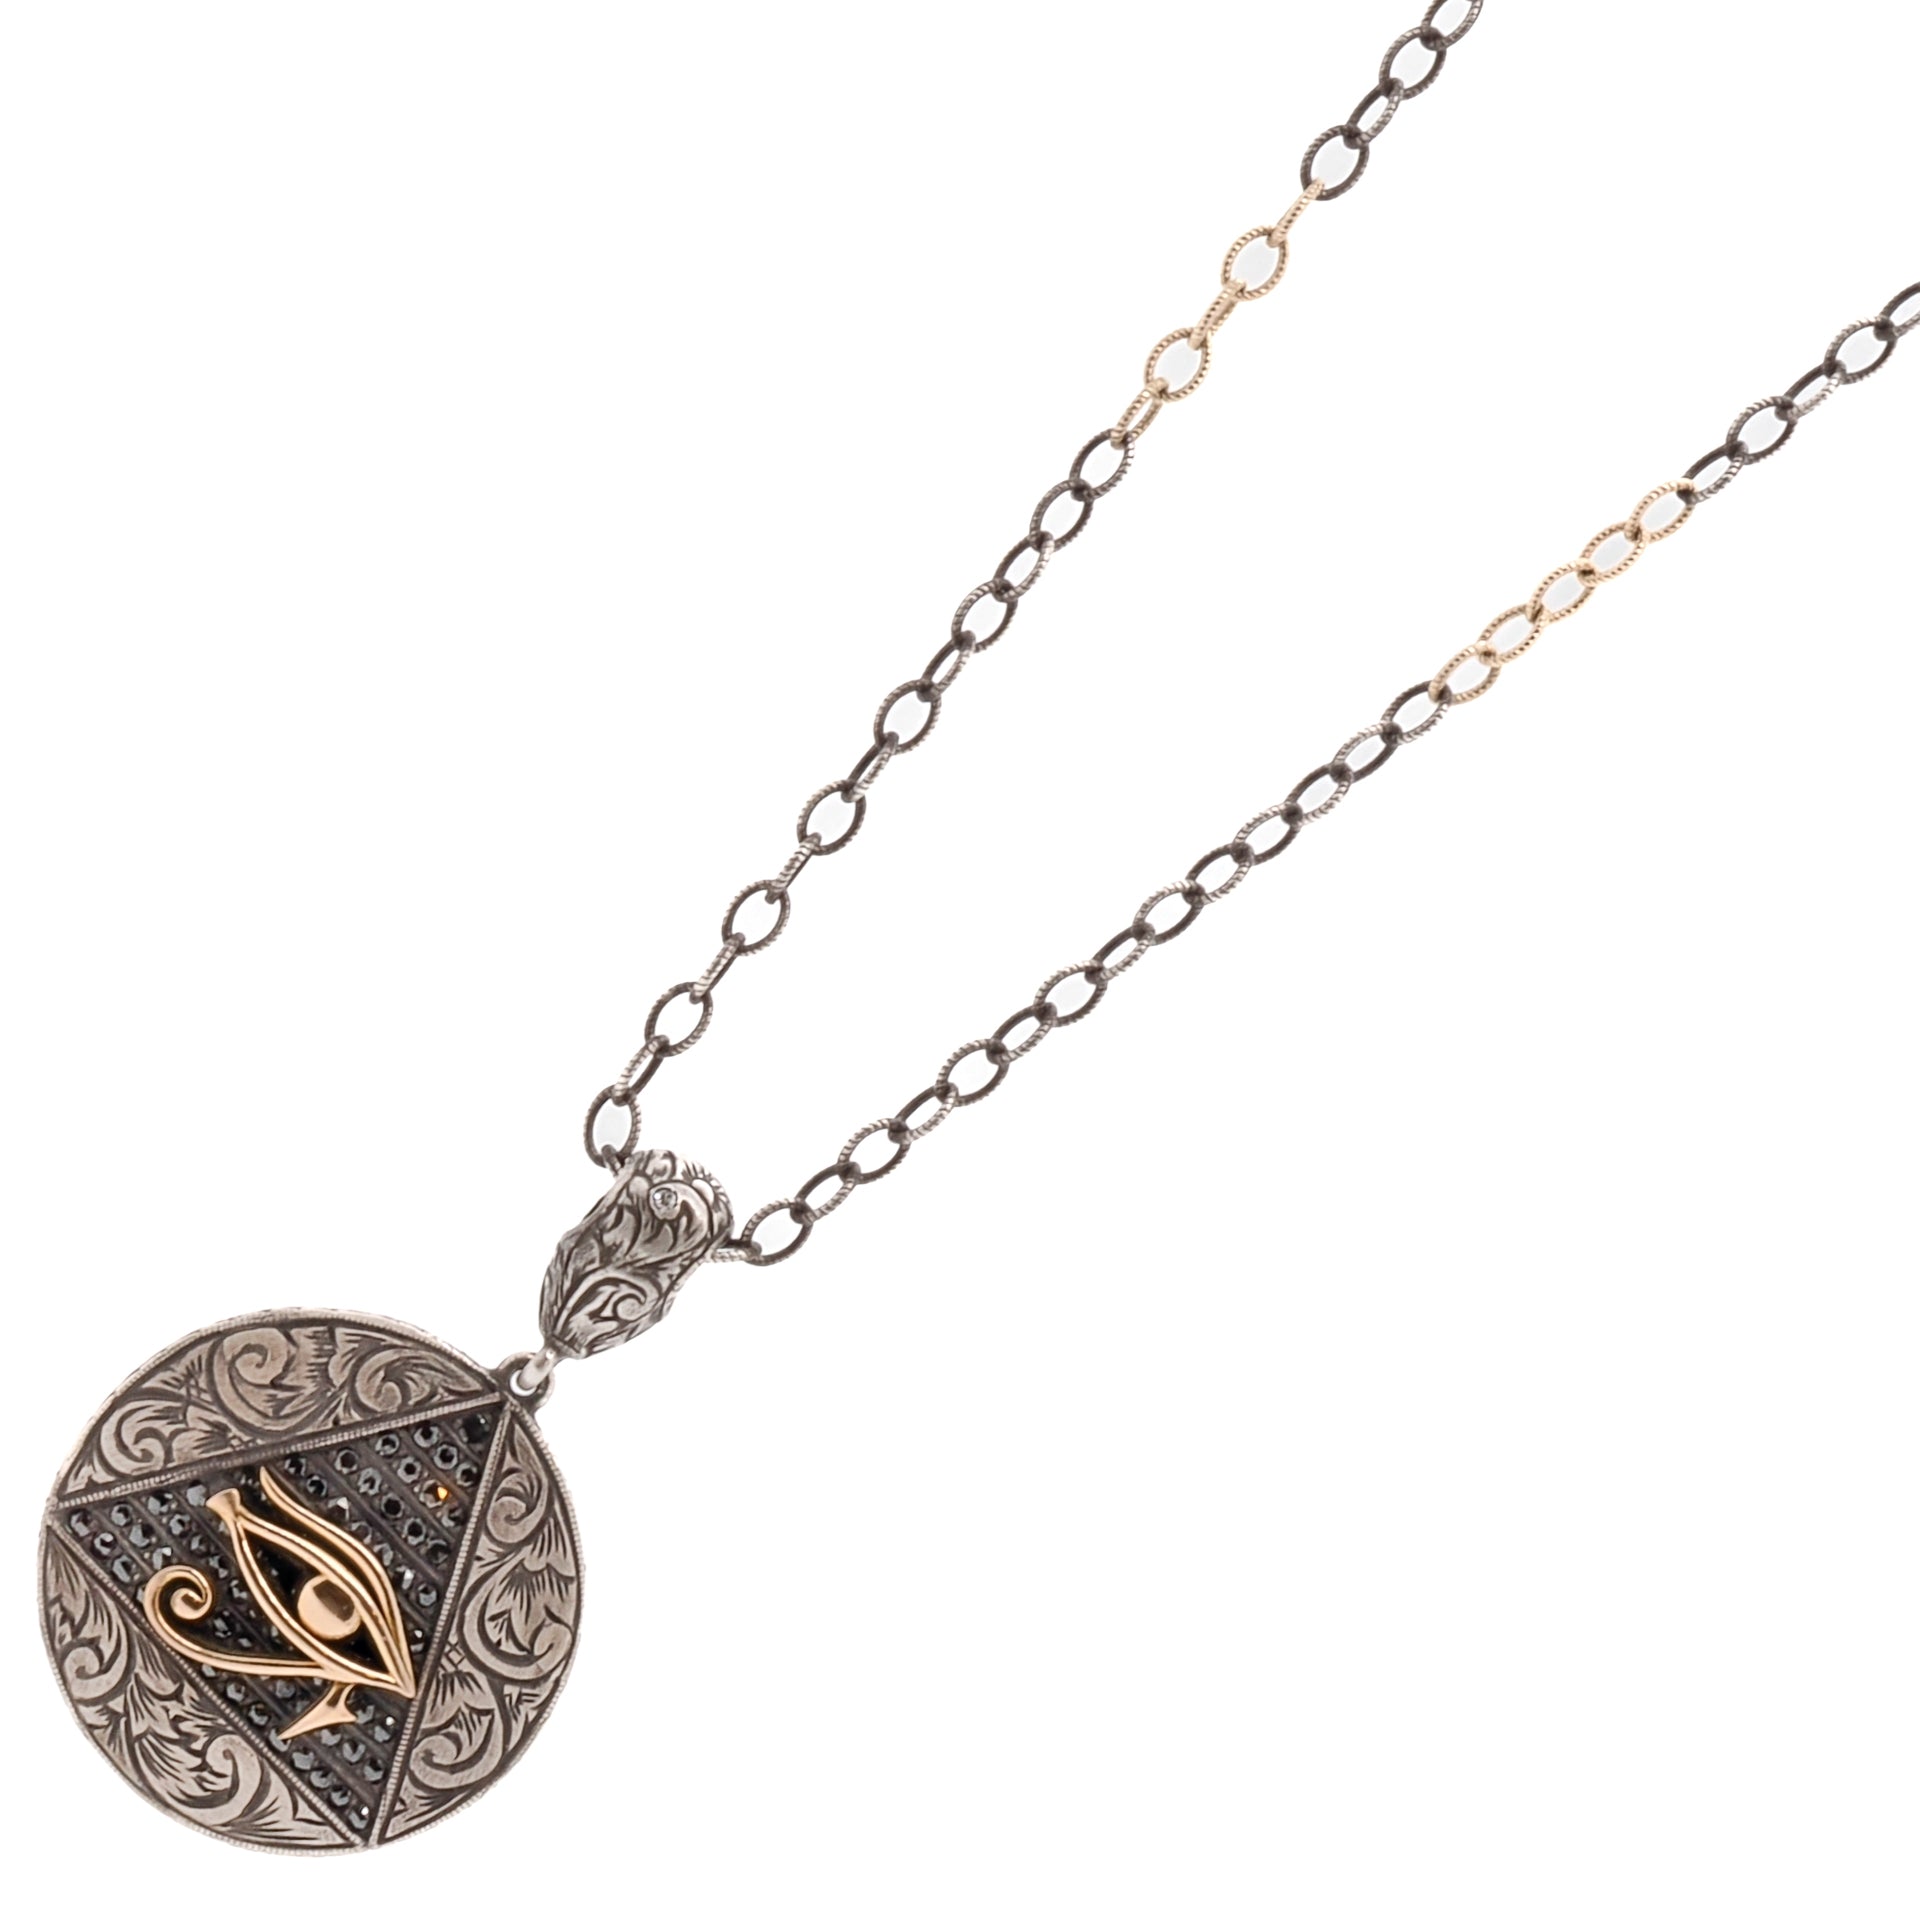 All-Seeing Eye Necklace - A Beautiful and Meaningful Piece of Fine Jewelry Handcrafted in the USA